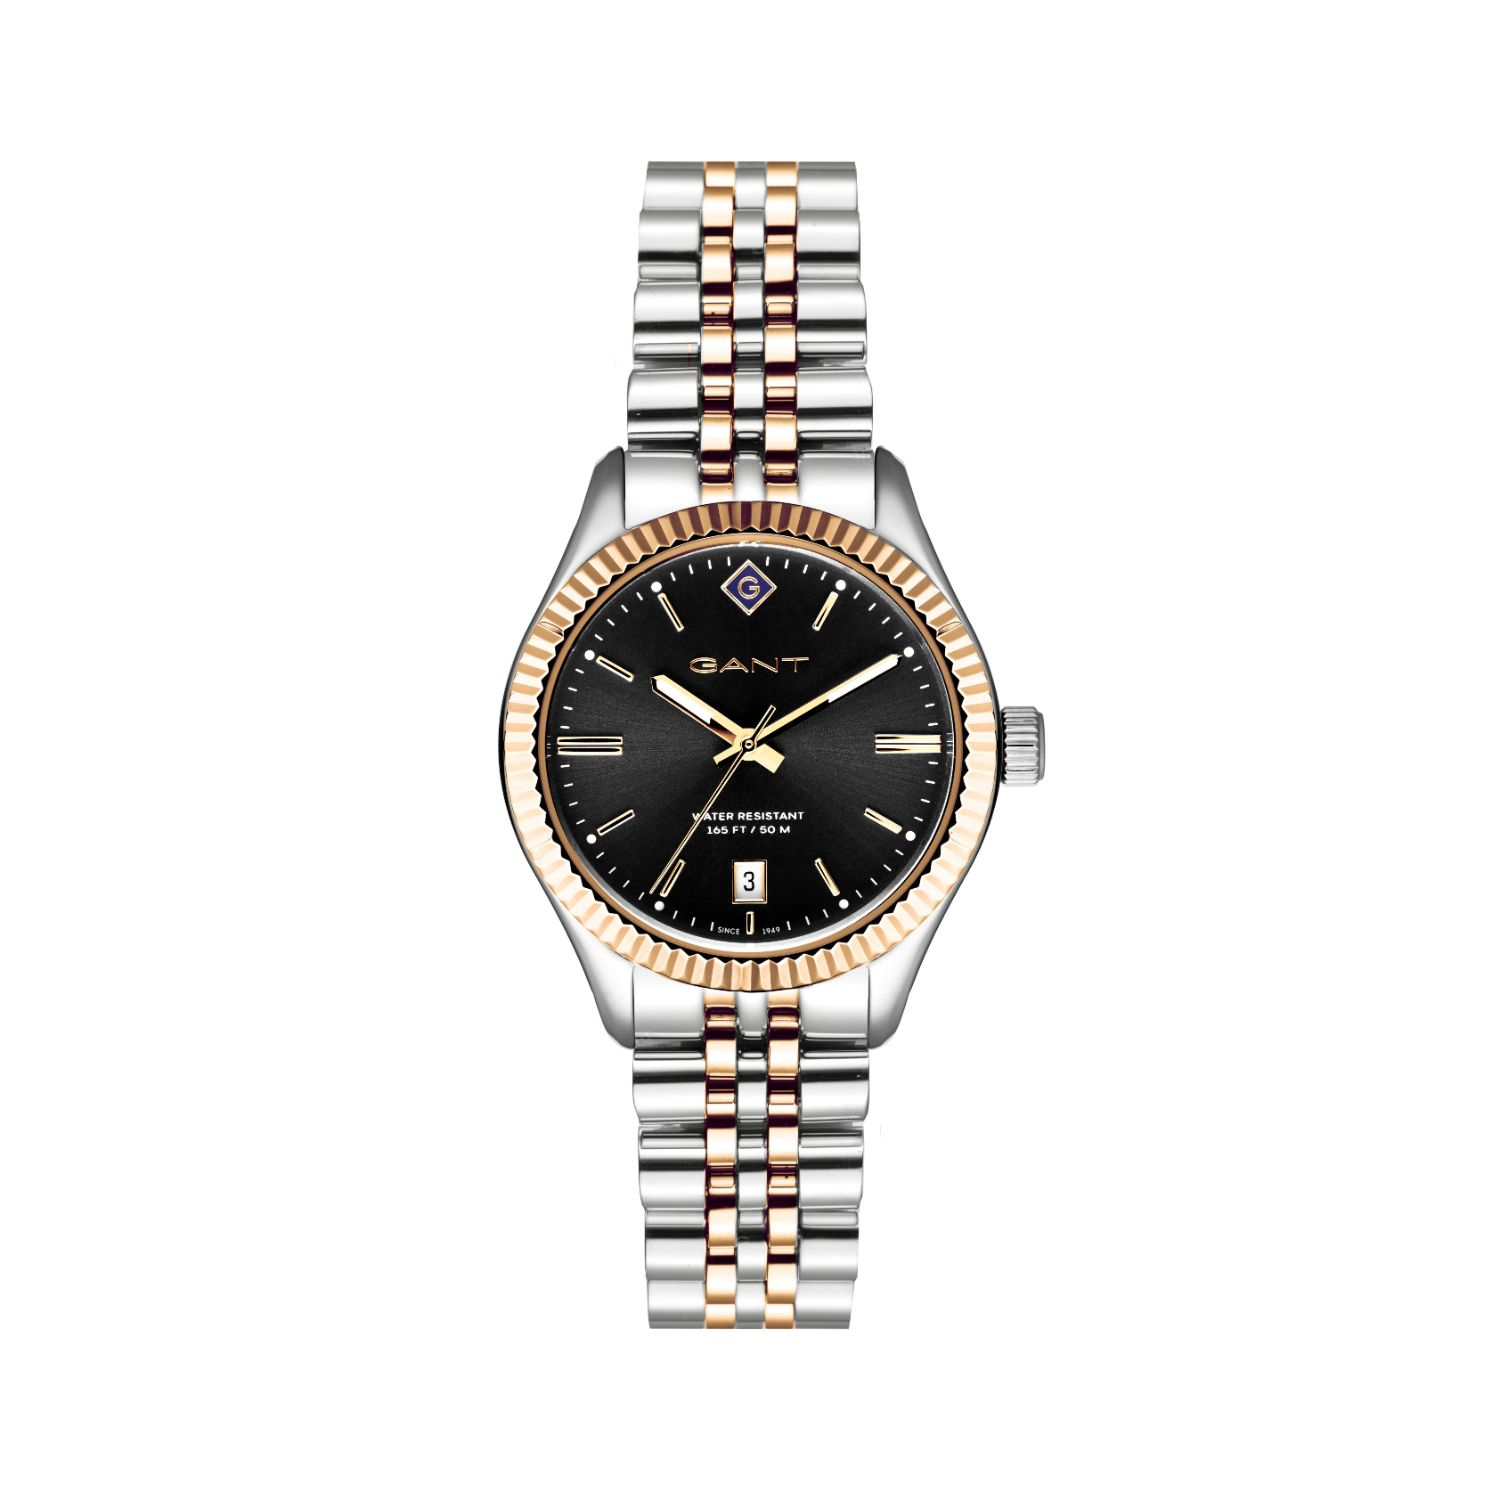 Womens Gant watch in two-tone stainless steel with black dial and bracelet.